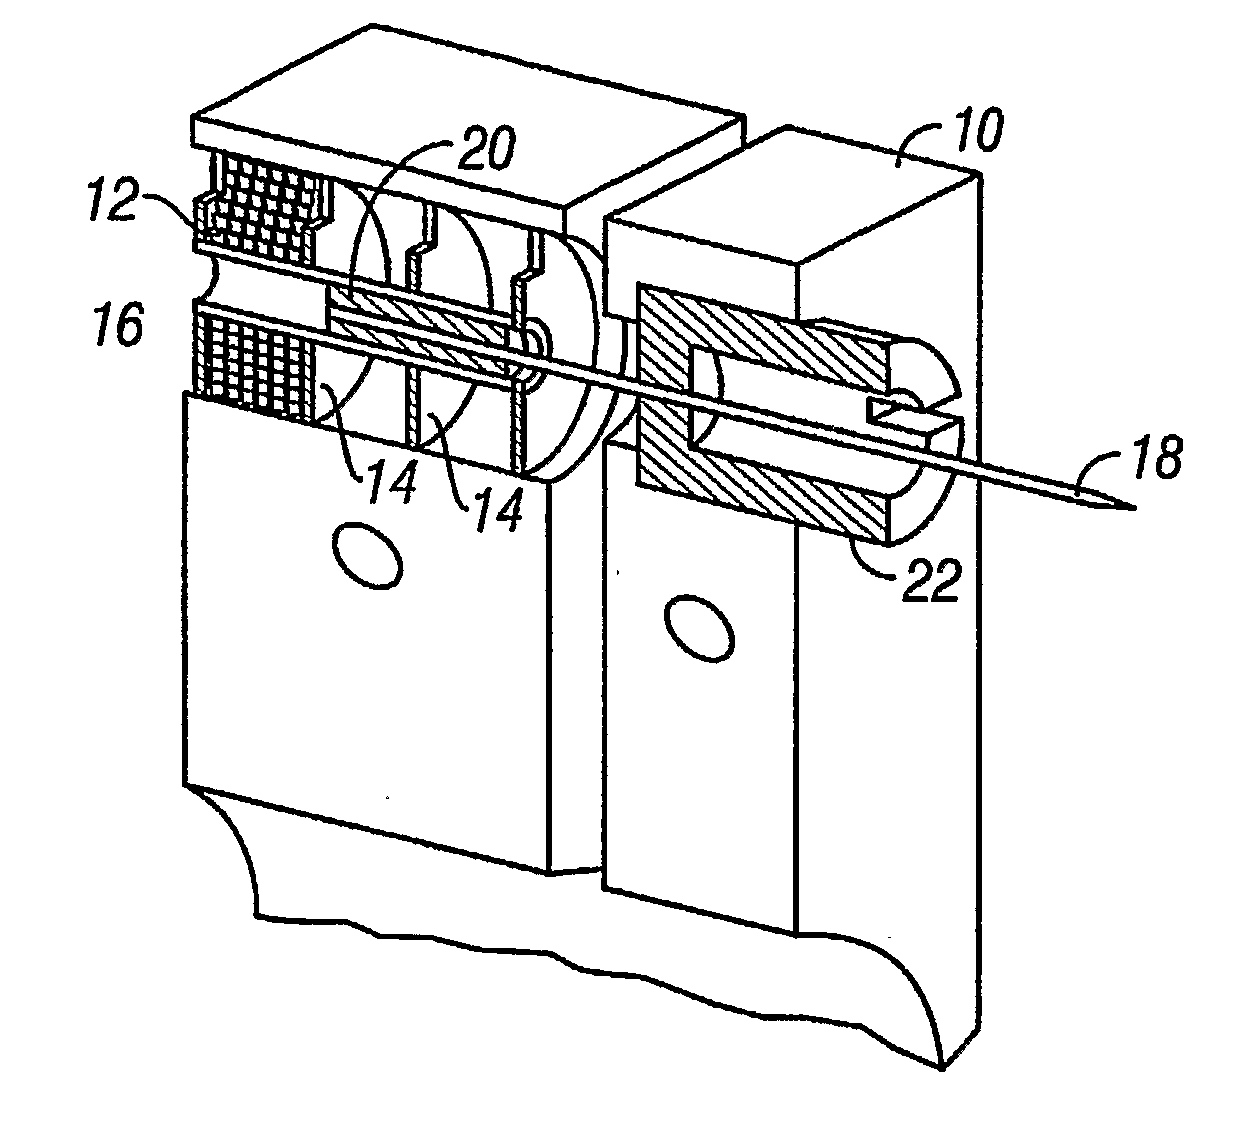 Method and apparatus for improving fluidic flow and sample capture